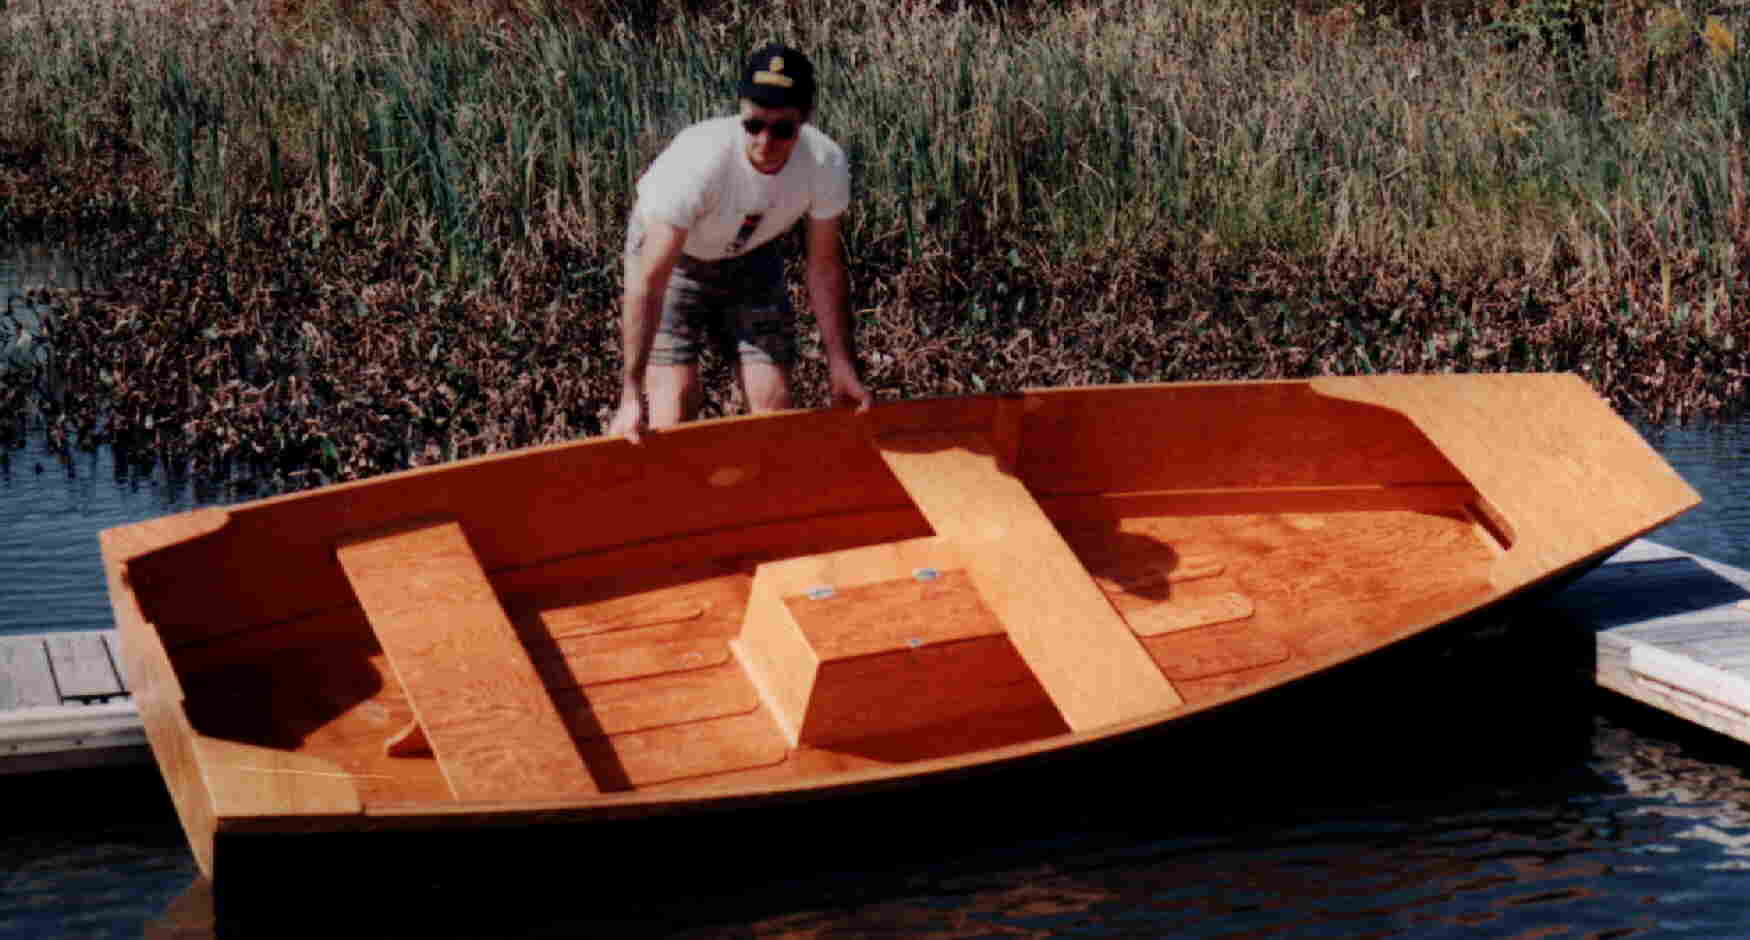 One Man Boat Plans A fishing boat Man-2 of the best boats for a